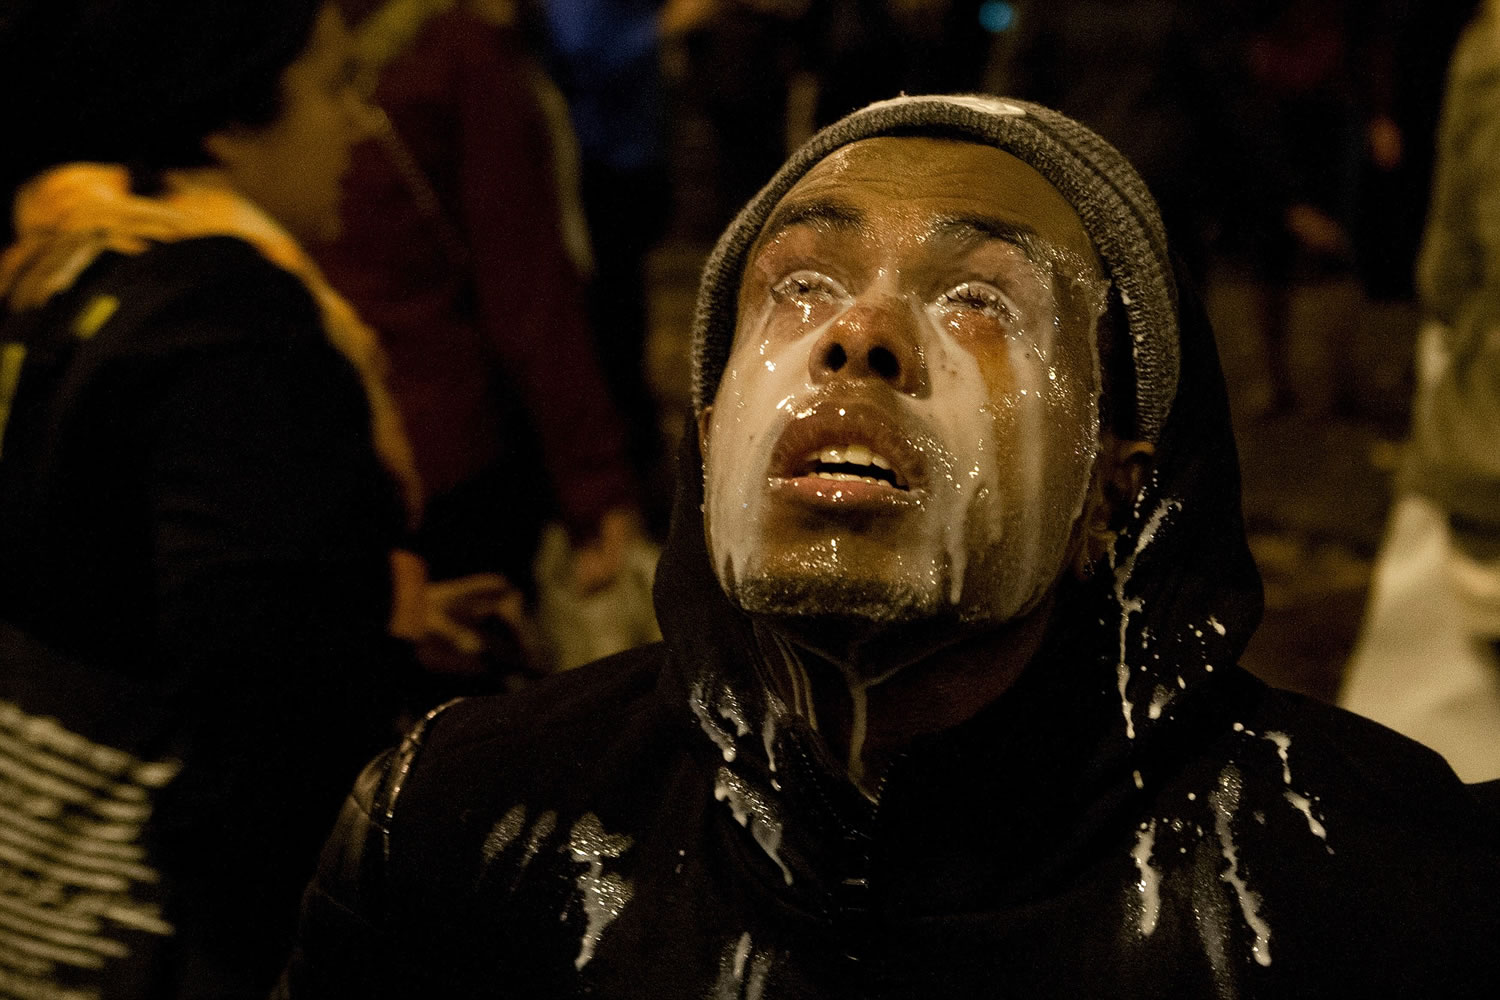 A protestor pours milk in his eyes after being tear gassed by Seattle police at the Interstate 5 entrance on Cherry Street in Seattle on Monday night.